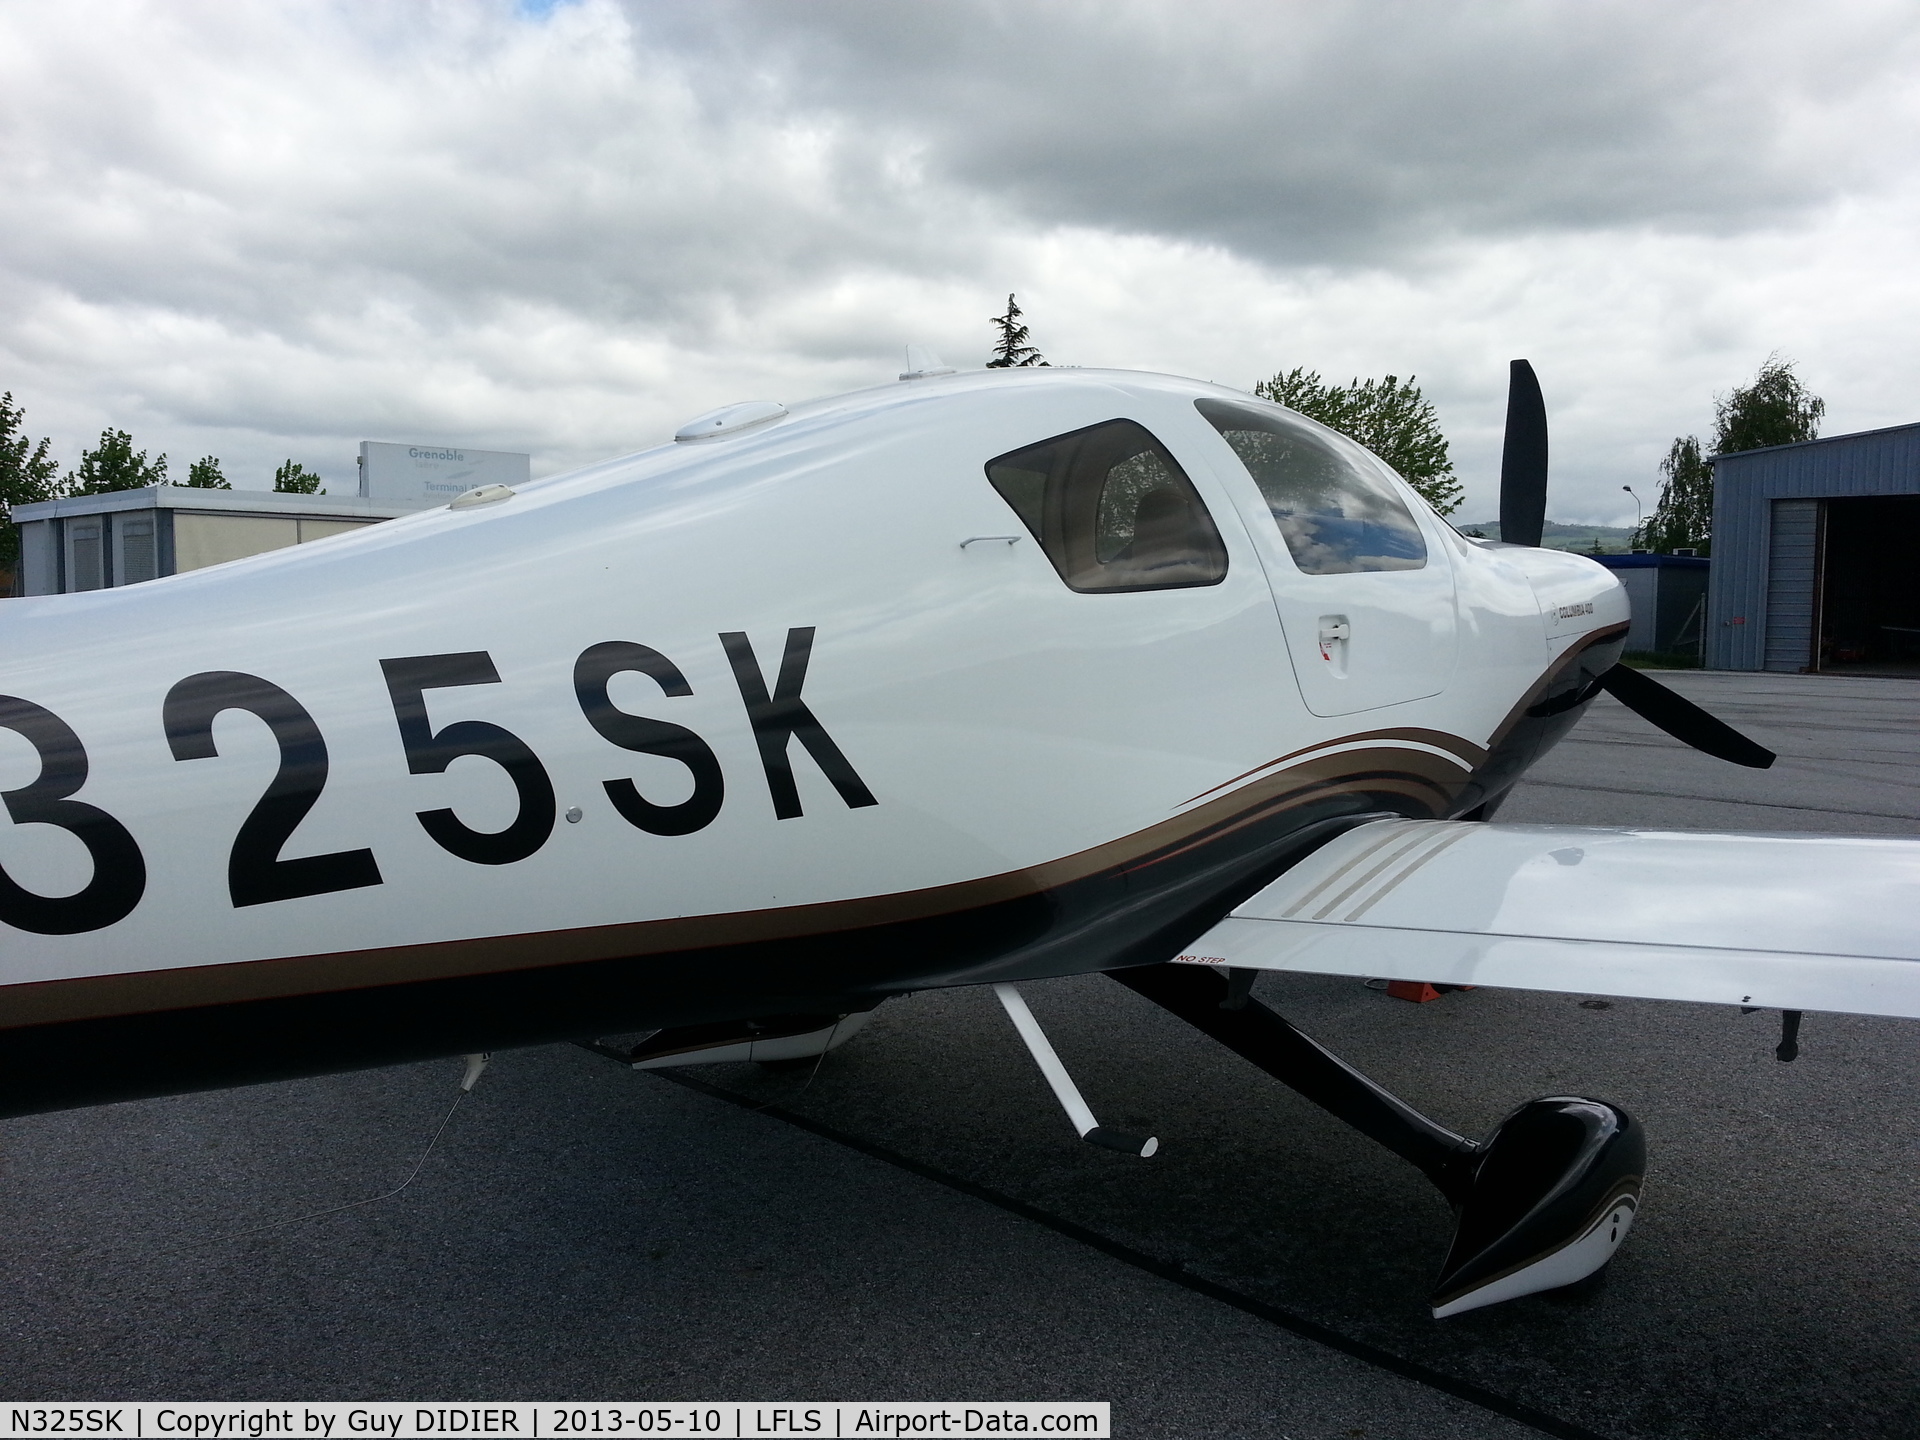 N325SK, 2005 Lancair LC41-550FG C/N 41528, At LFLS with a pretty bad weather